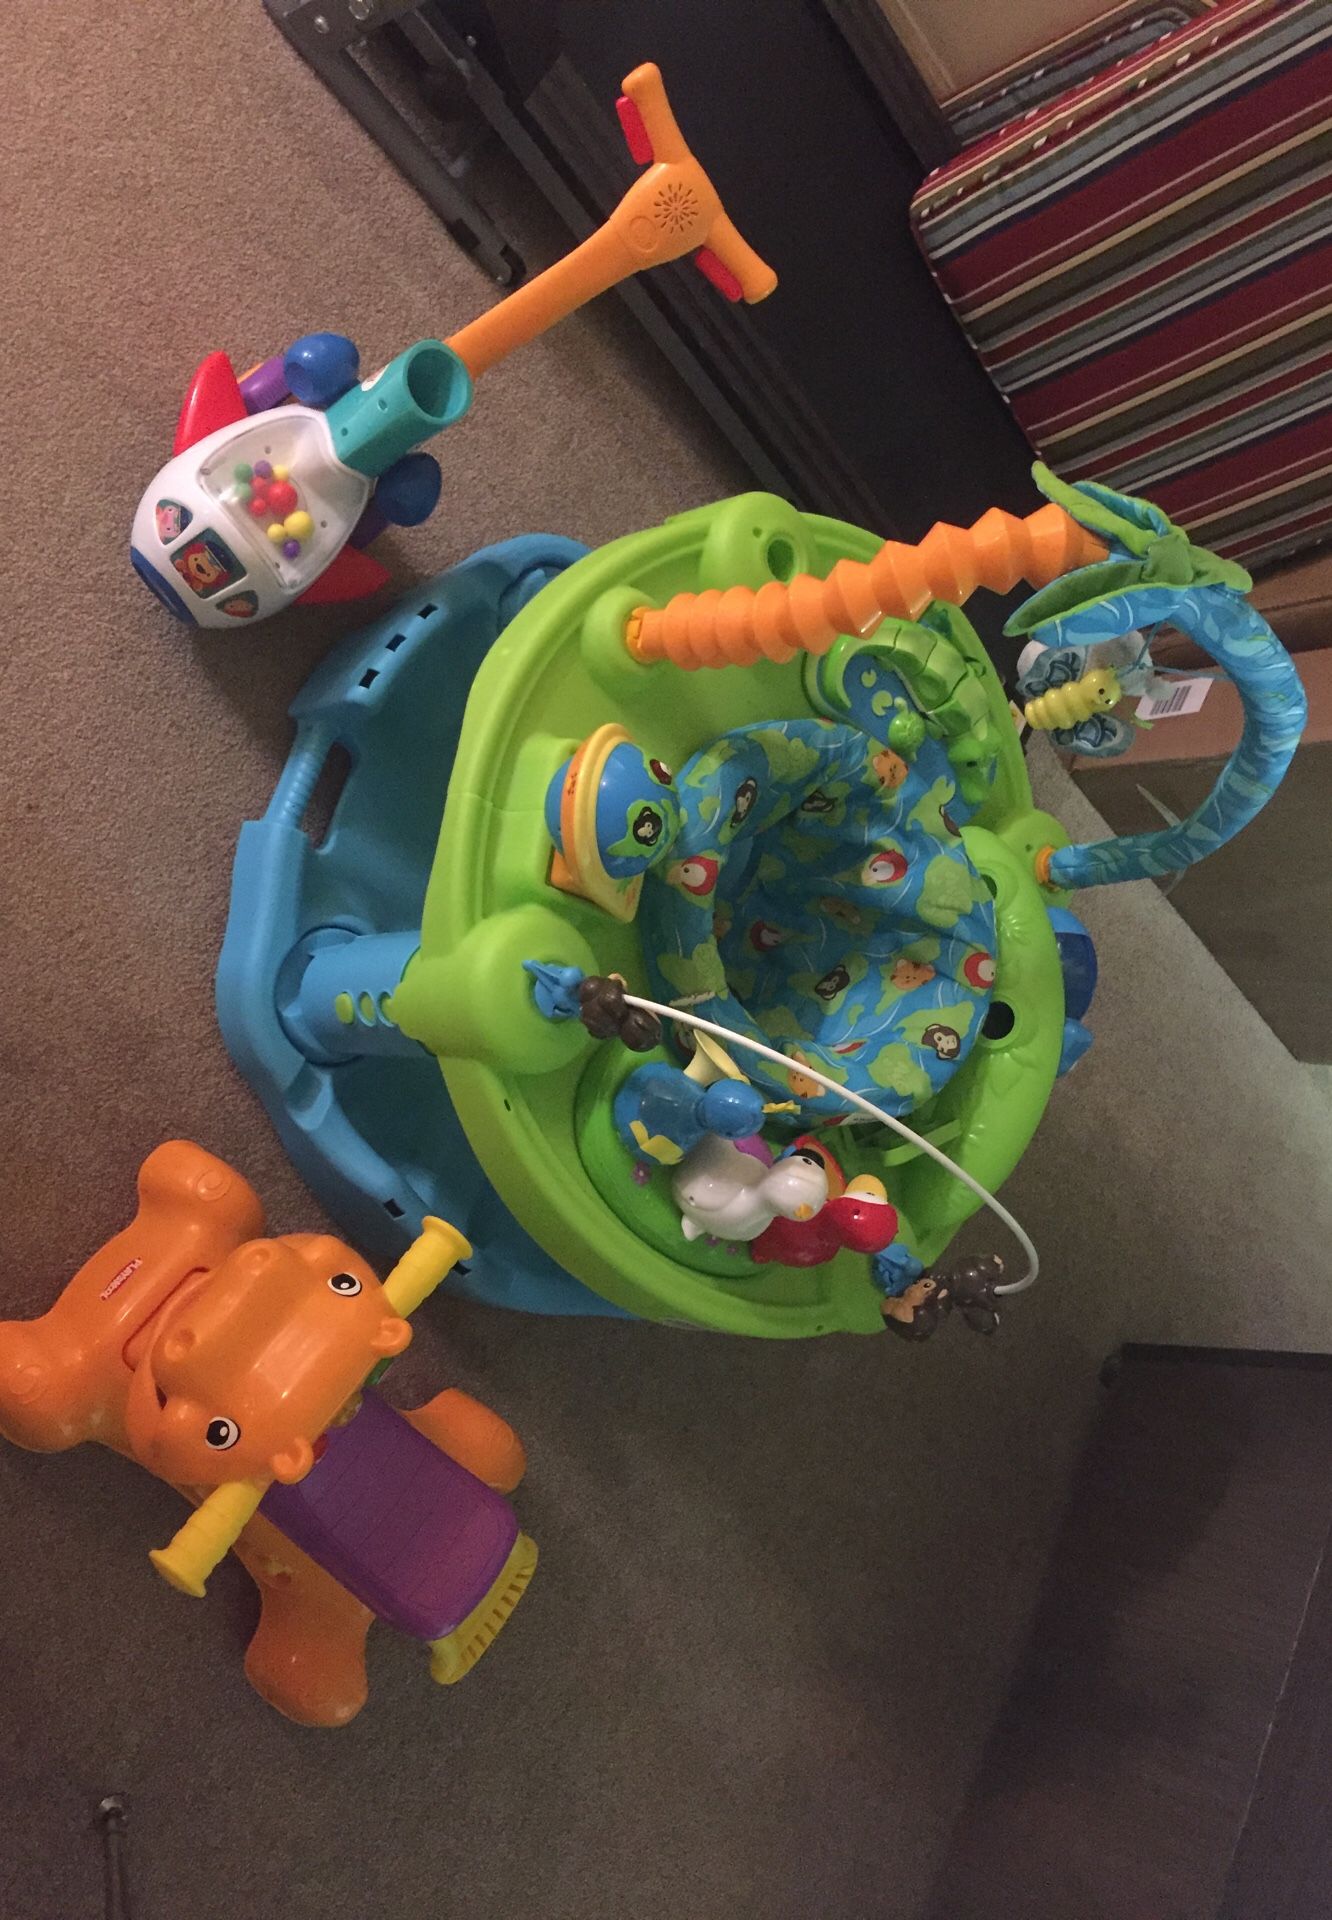 Toys for baby